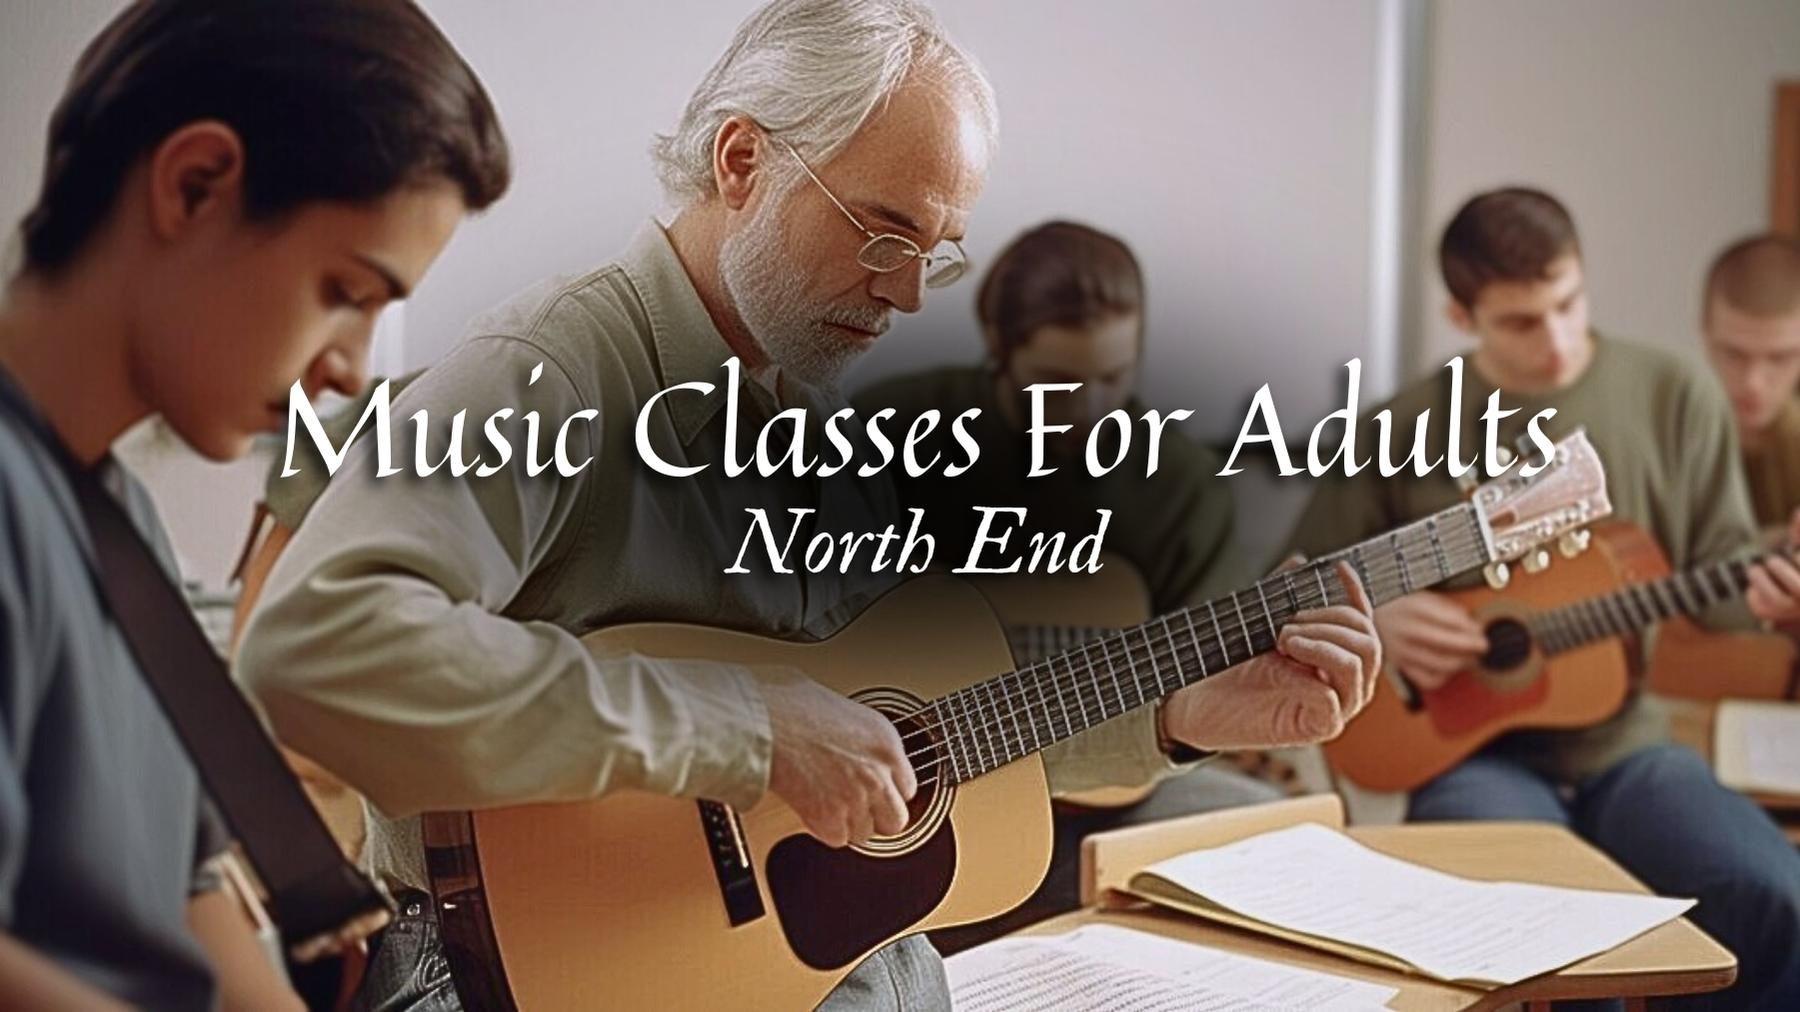 Welcome to Musicians Playground: Music Classes for Adults in North End, Massachusetts